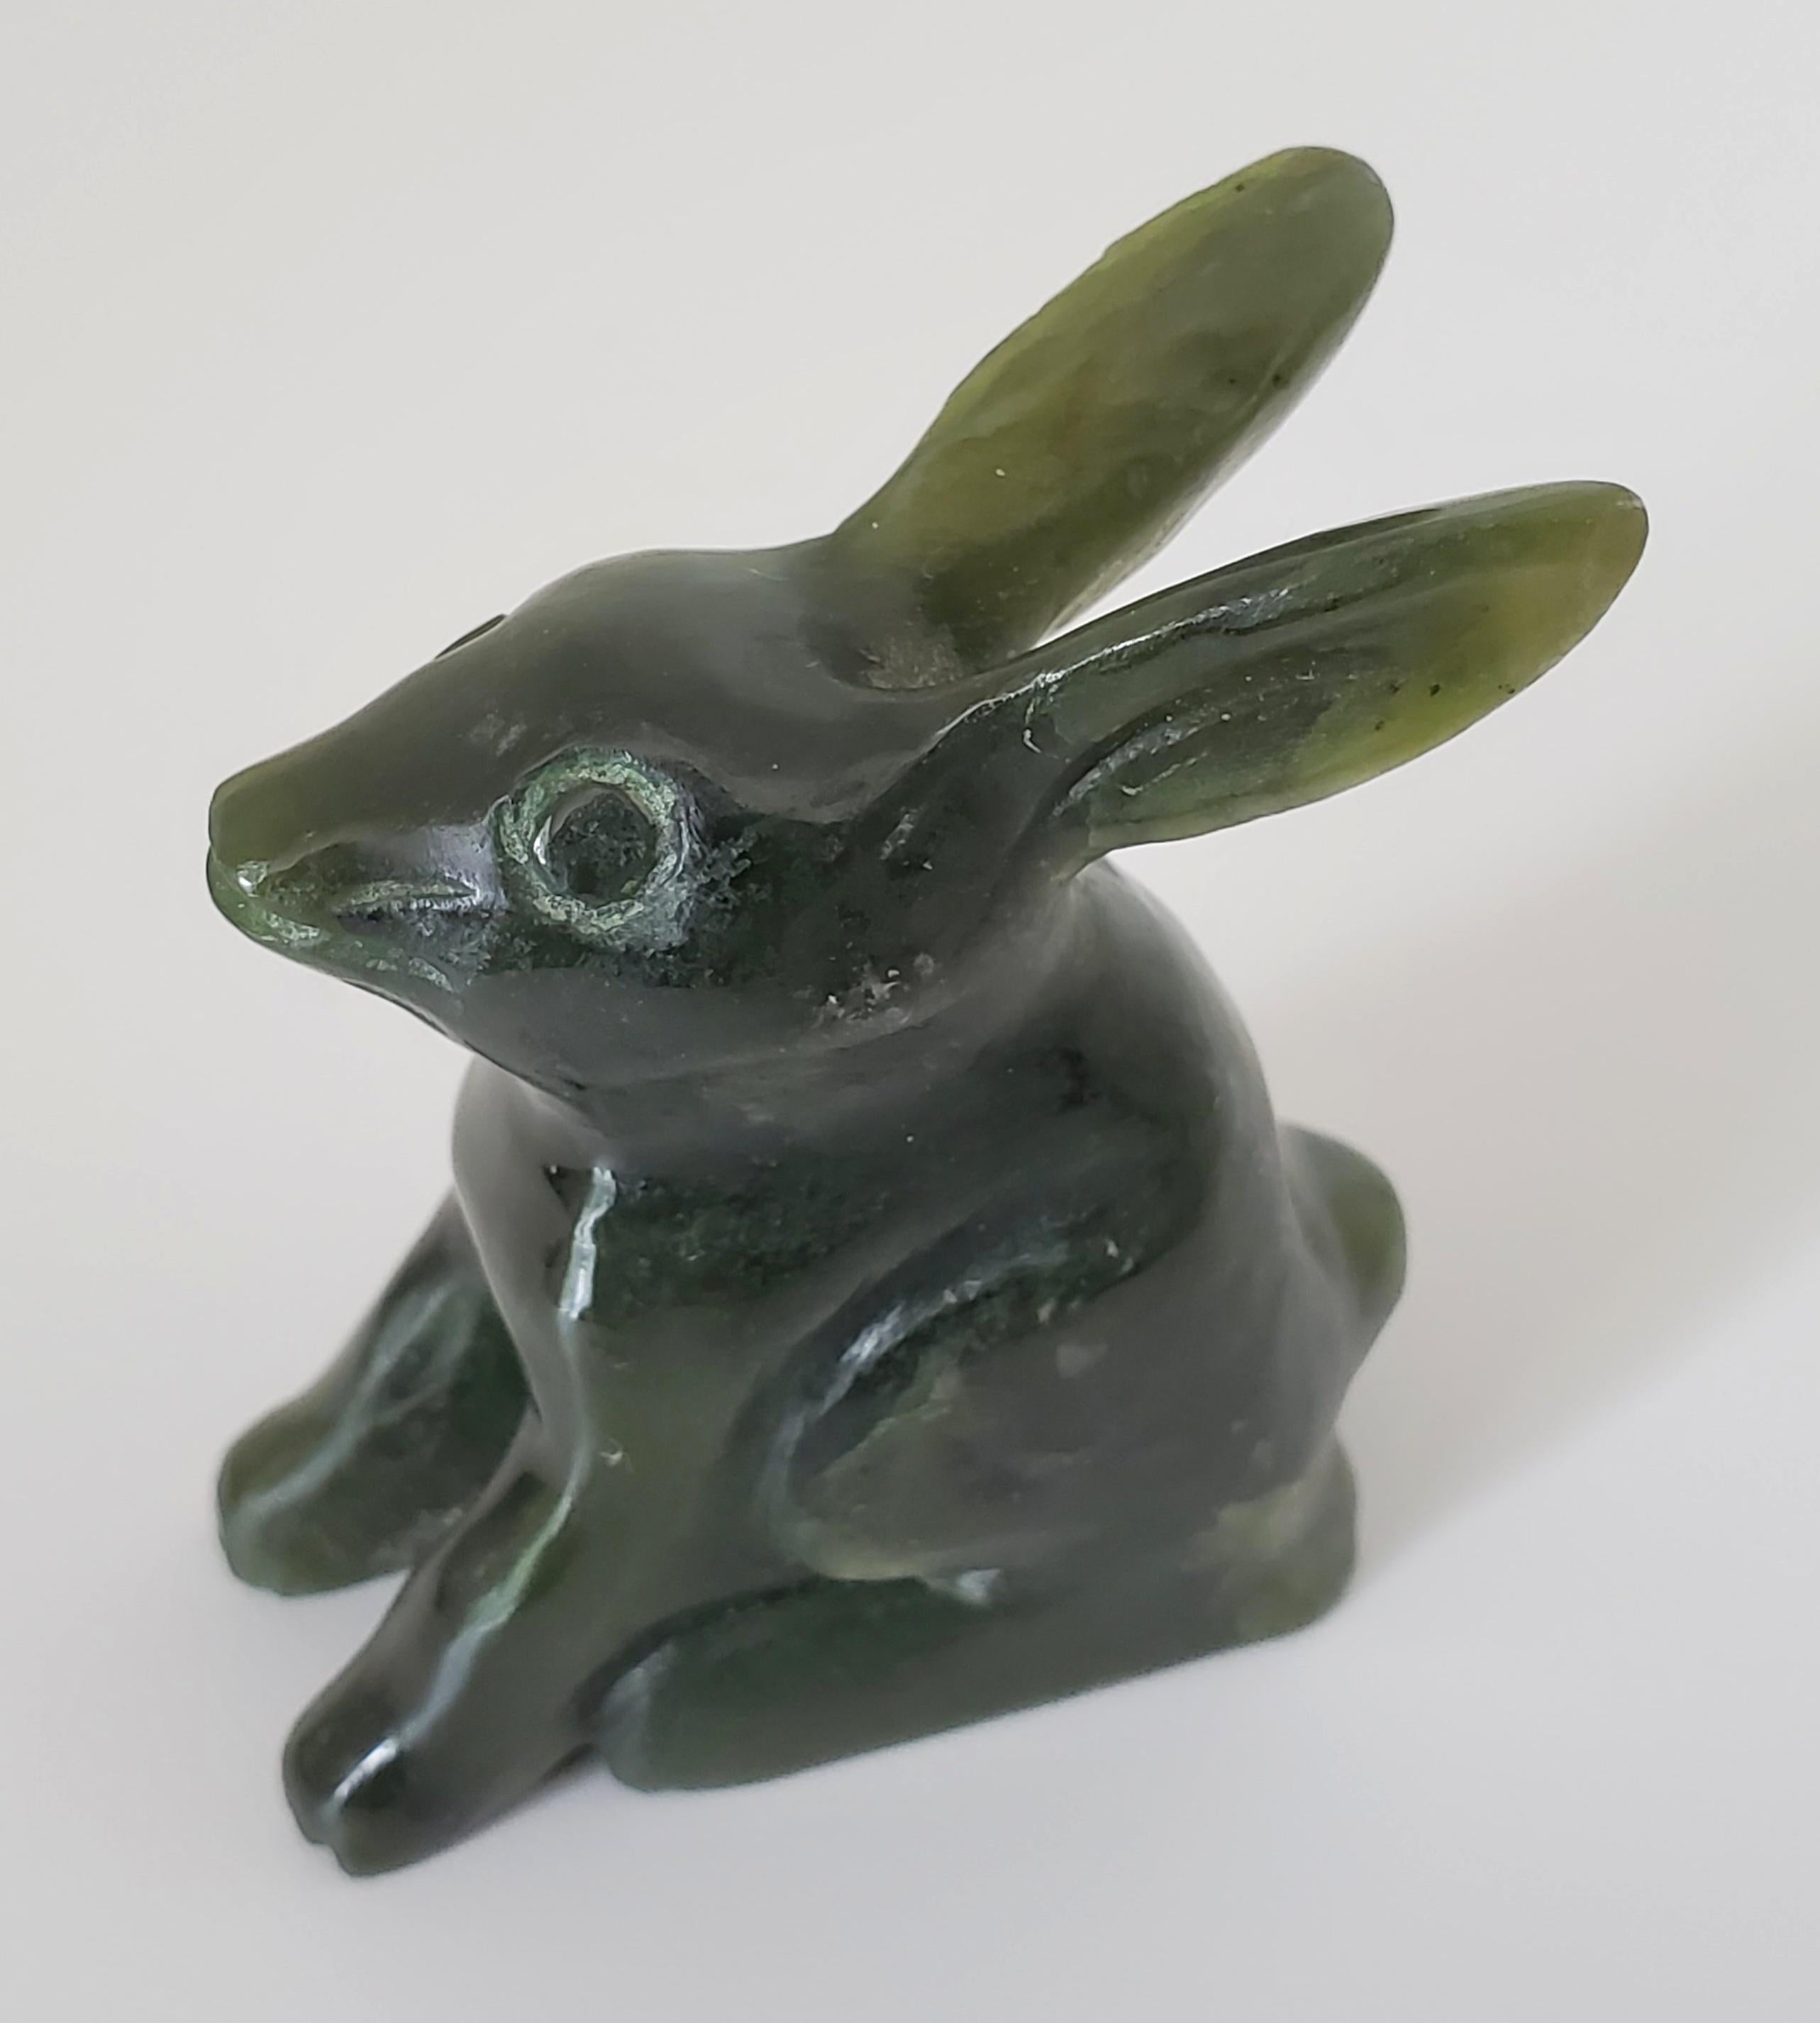 These lovely spinach jade animal figures consist of a rabbit and three ducks, the largest of which is the rabbit at 5cm x 4.2cm x 2cm. These animal figures were purchased from a collection that included museum quality Asian antiques such as a large